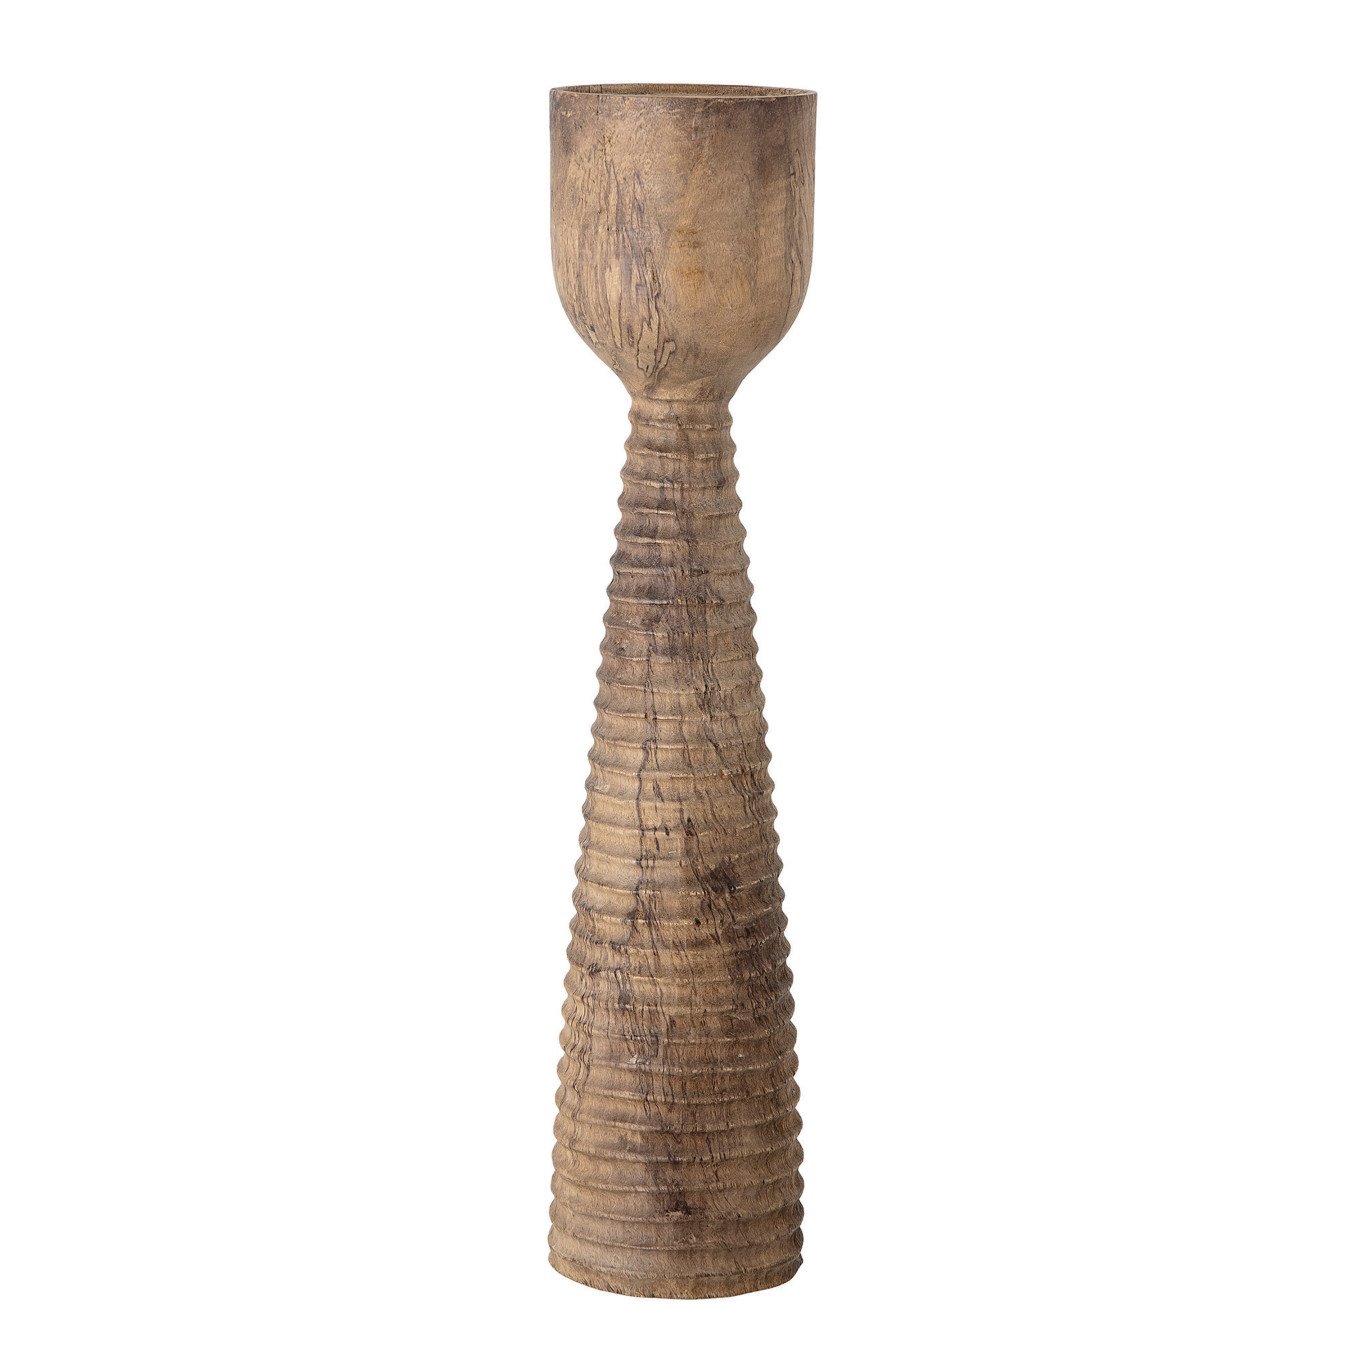 24"H Hand-Carved Mango Wood Candleholder with Ribbed Design (Holds 4" Pillar Candle)